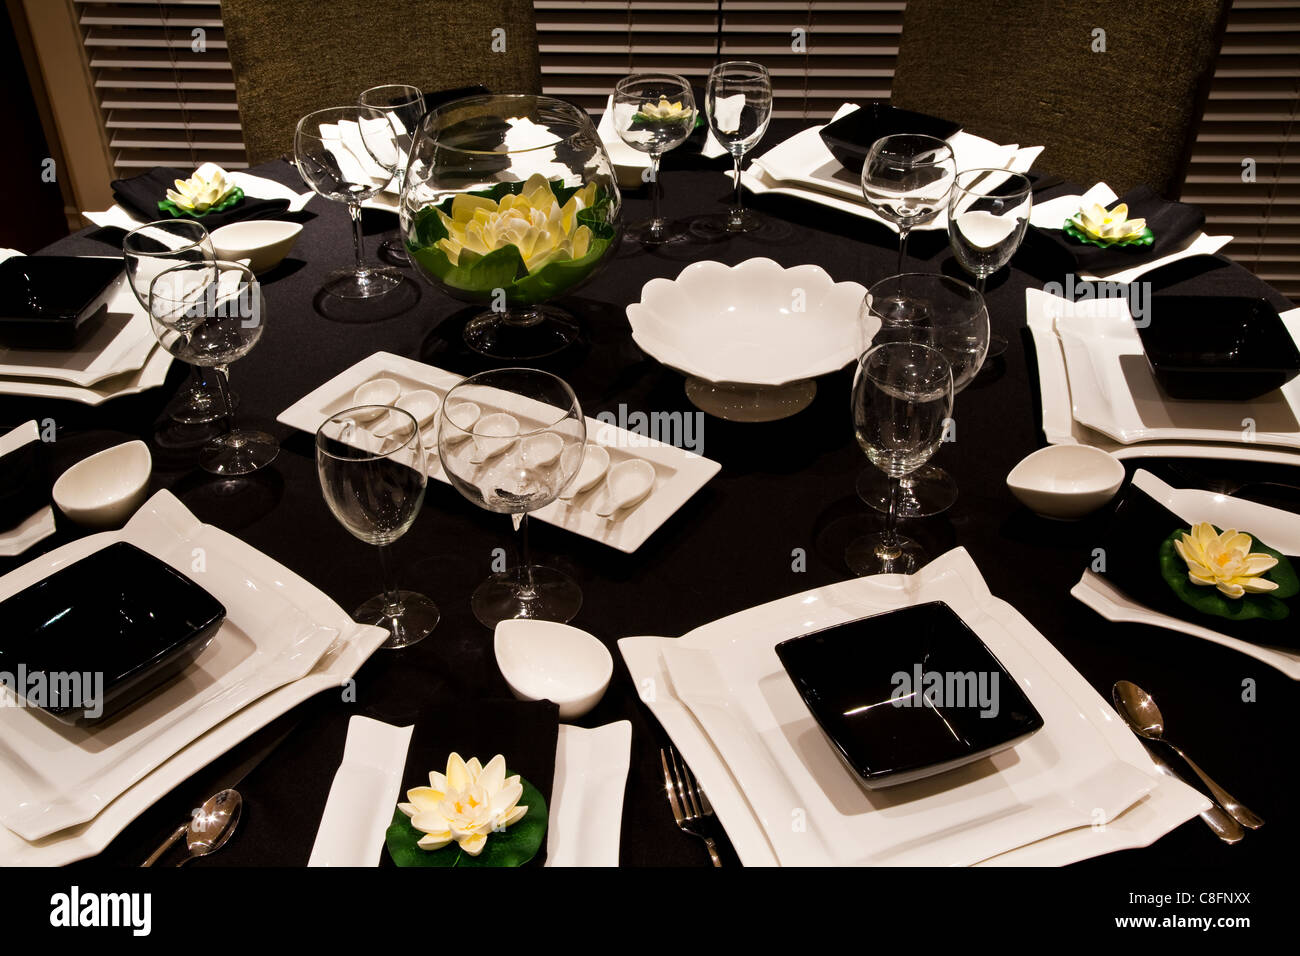 A formal table setting for dinner Stock Photo